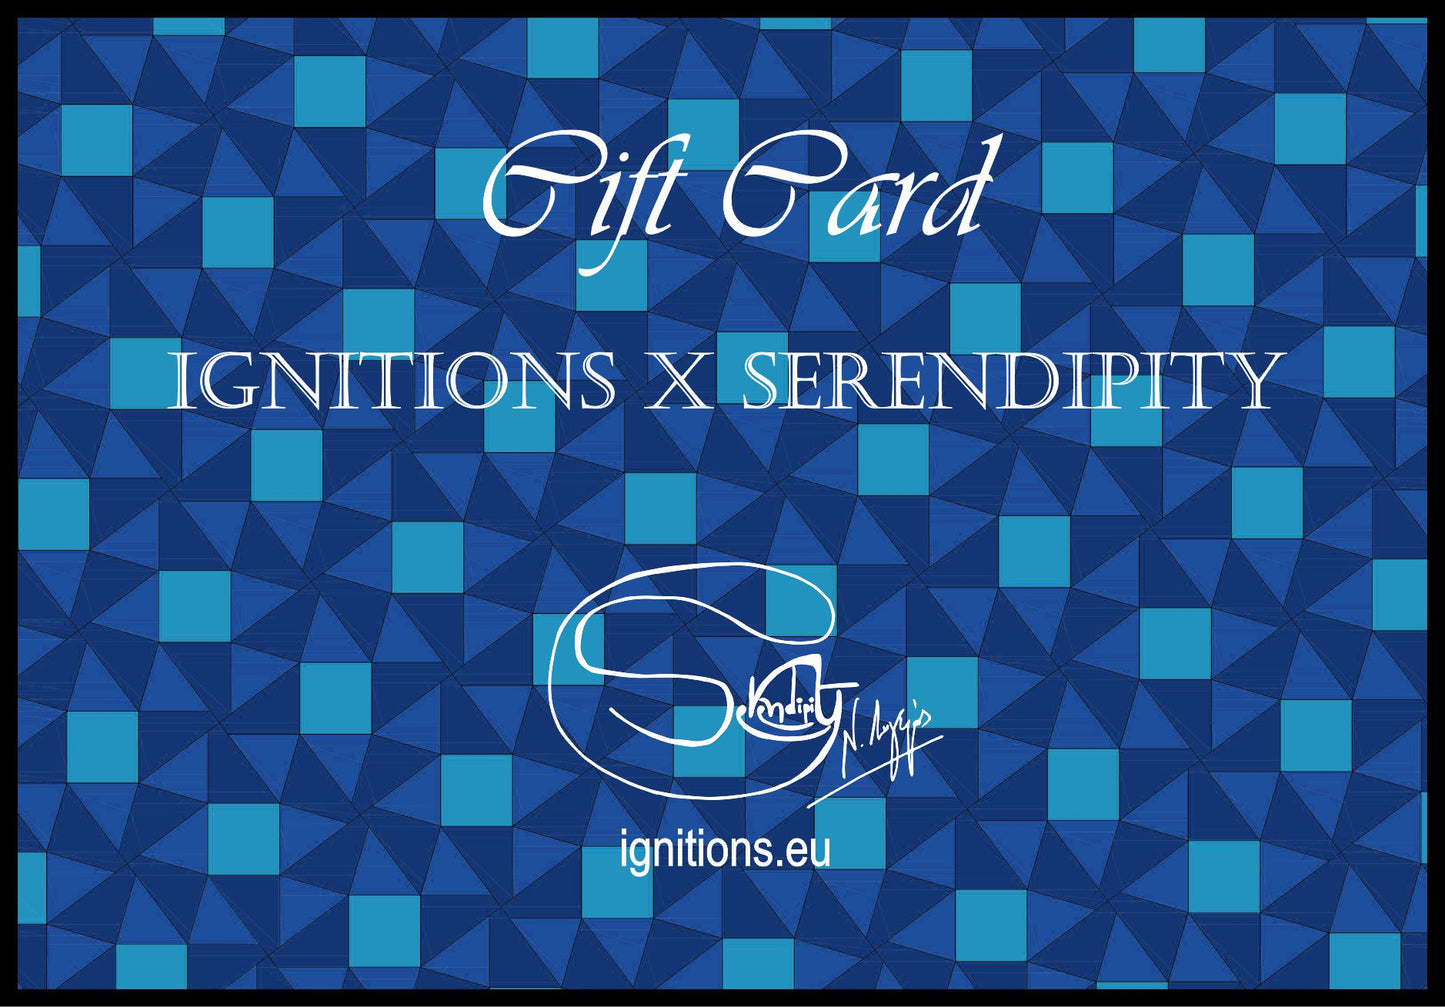 IGNITIONS X SERENDIPITY - GIFT CARD